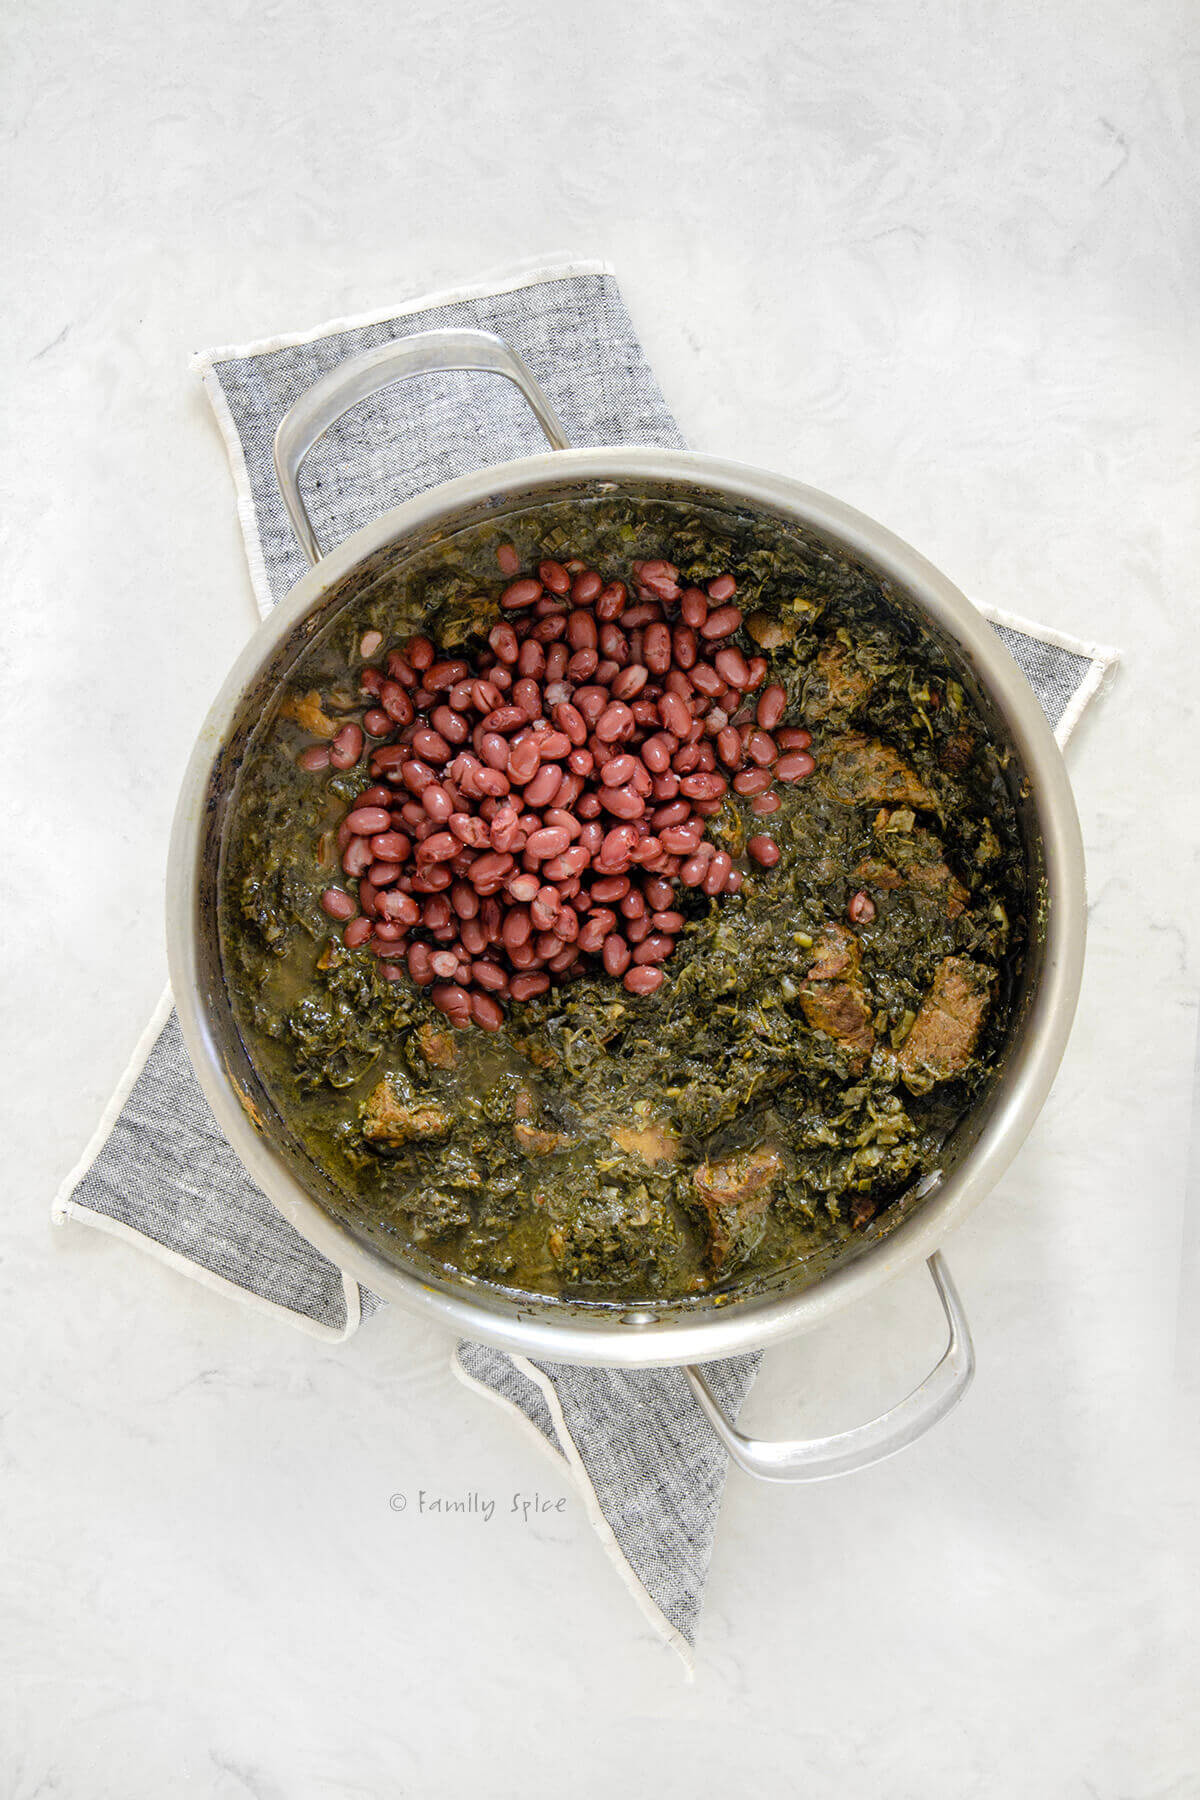 Top view of a stainless pot with ghormeh sabzi with small kidney beans added to it